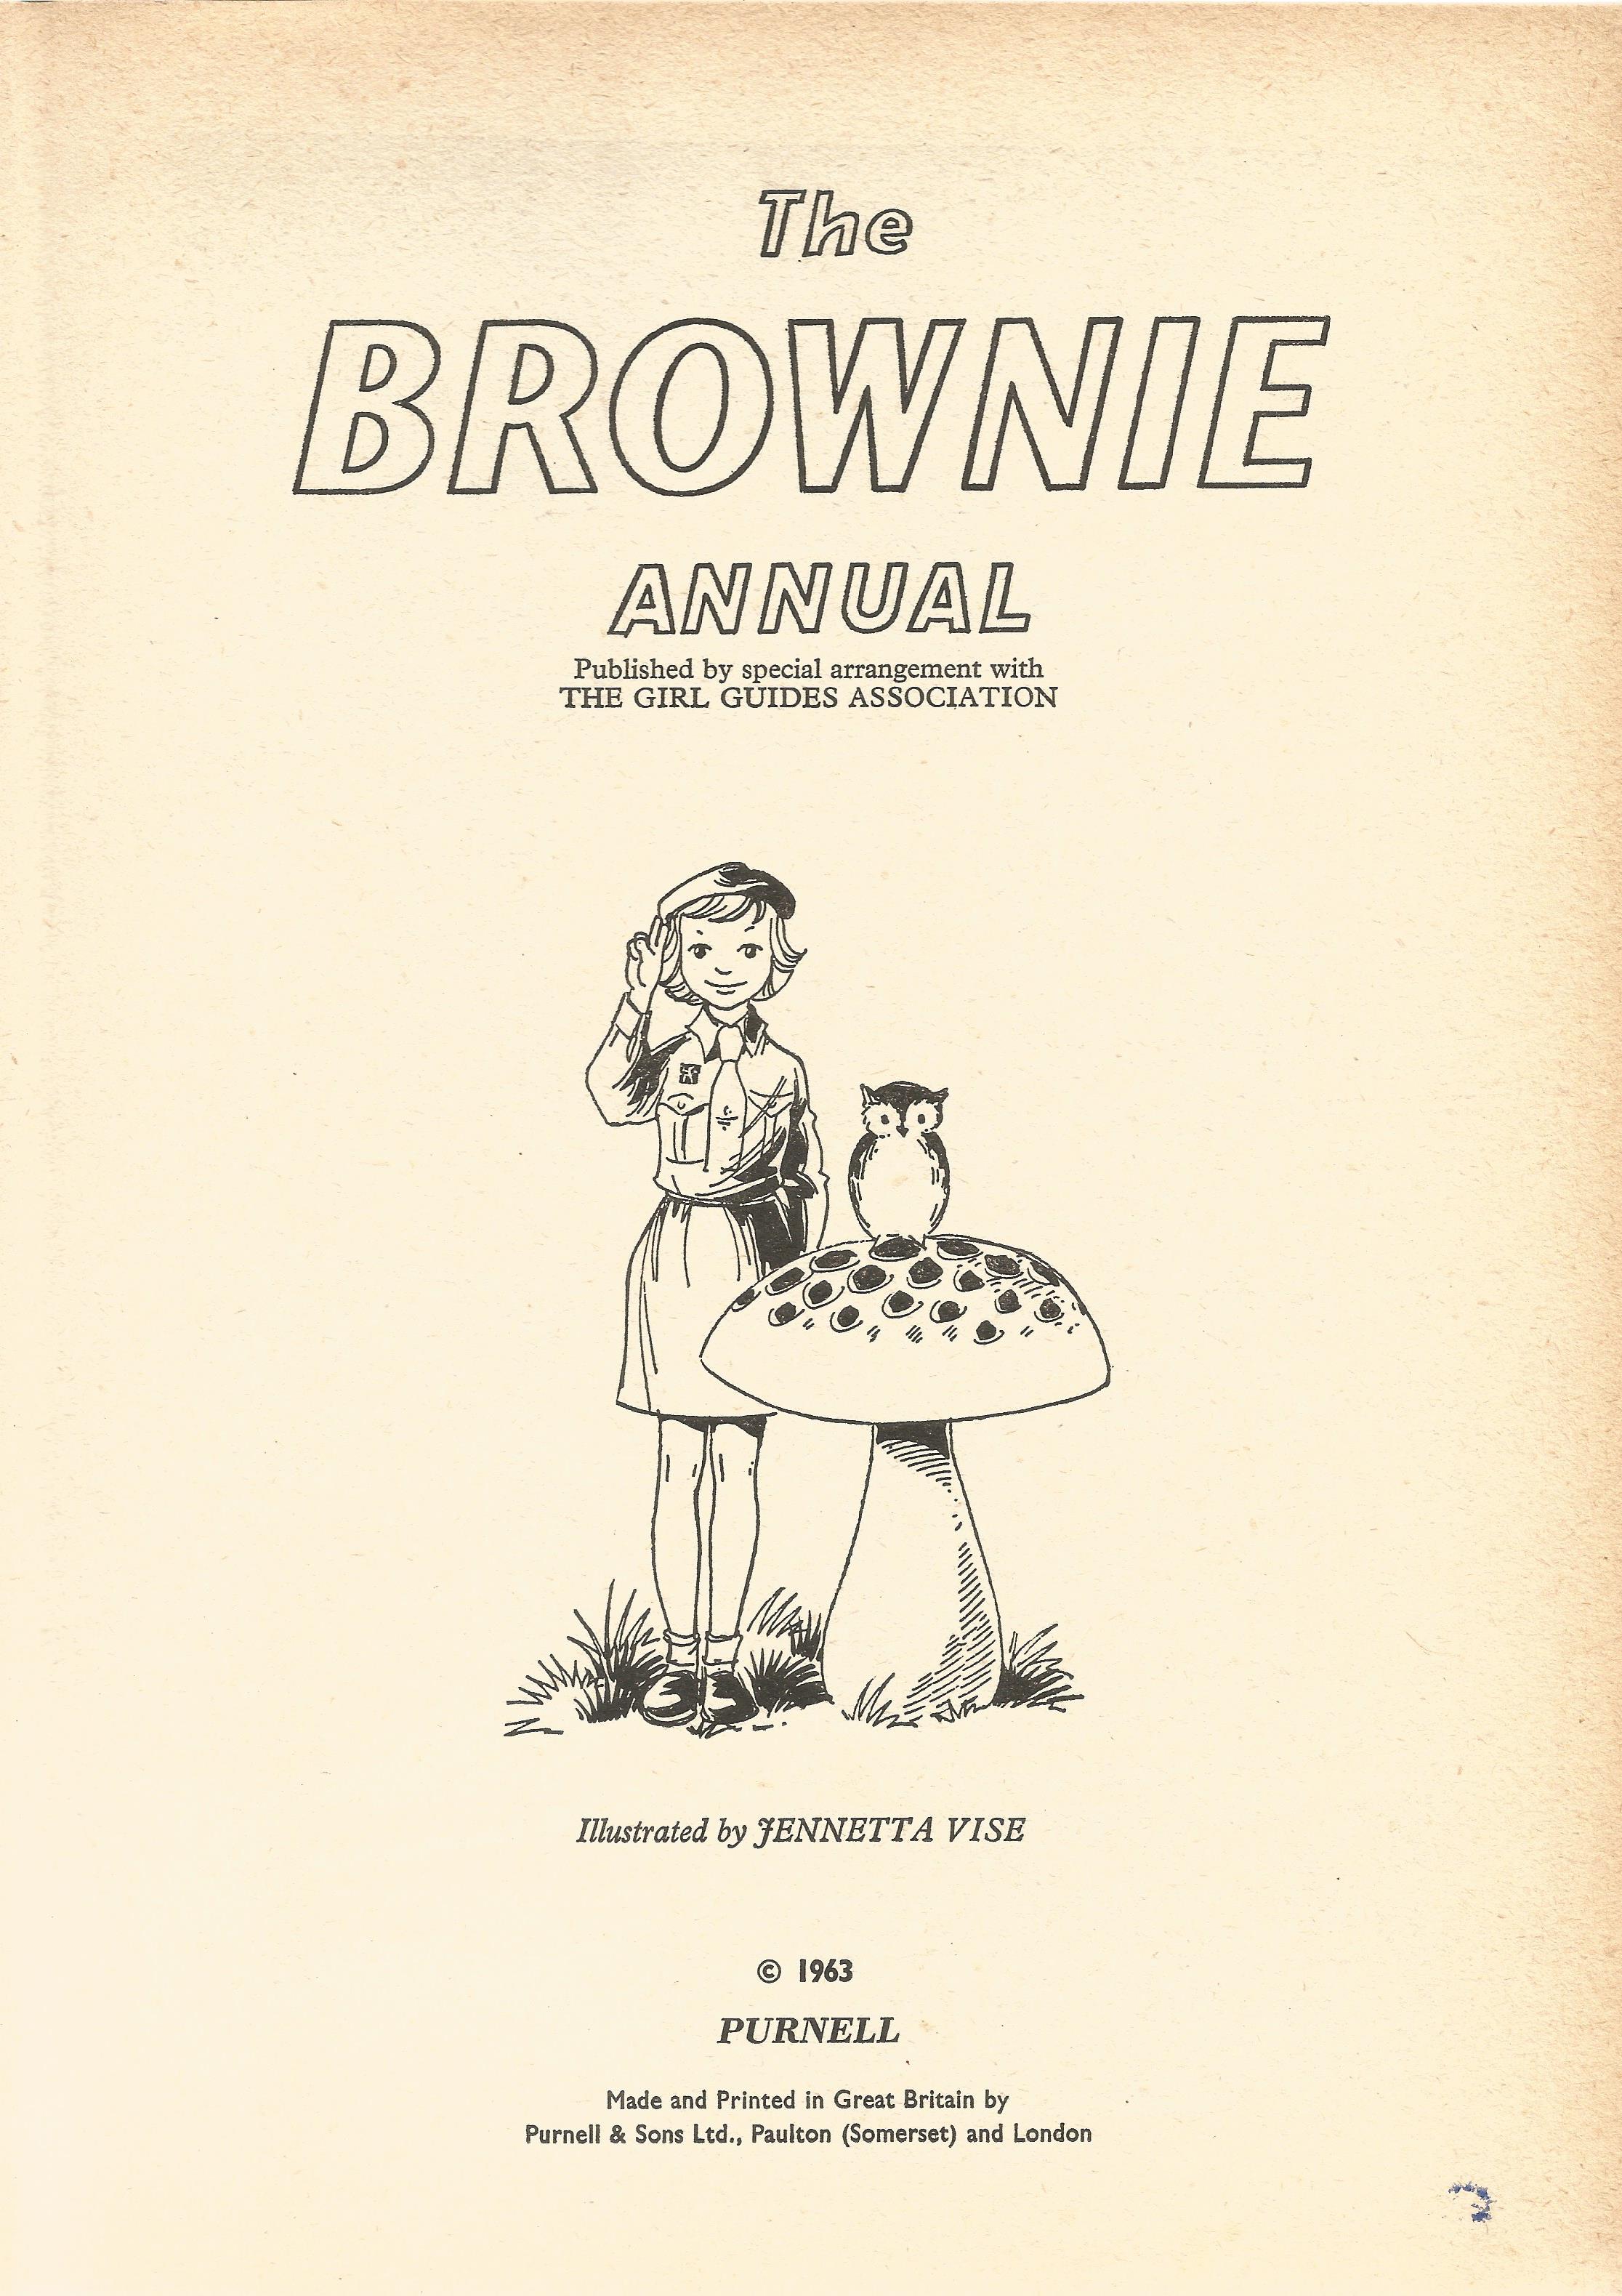 The Brownie Annual for 1963 The Girl Guides Association Hardback Book published by Purnell and - Image 2 of 2